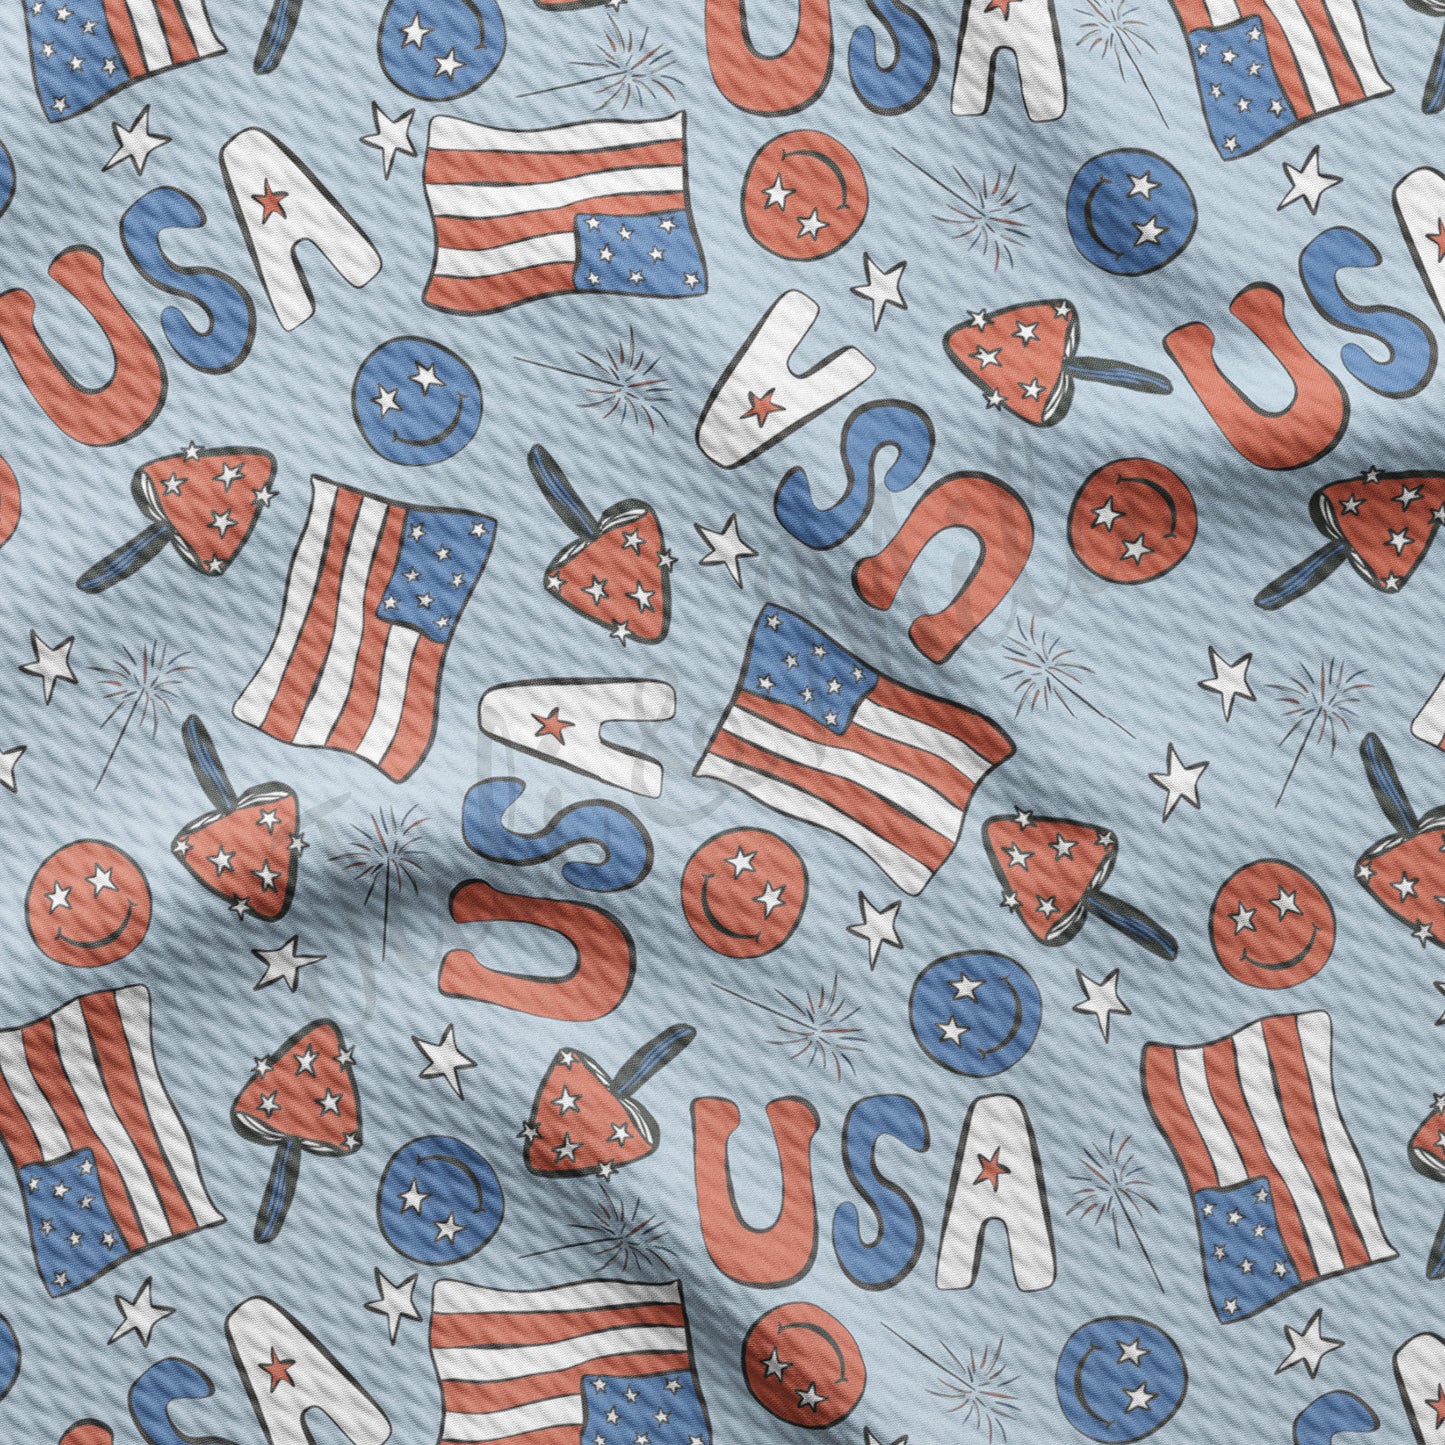 Patriotic 4th of July Textured Fabric AA1229